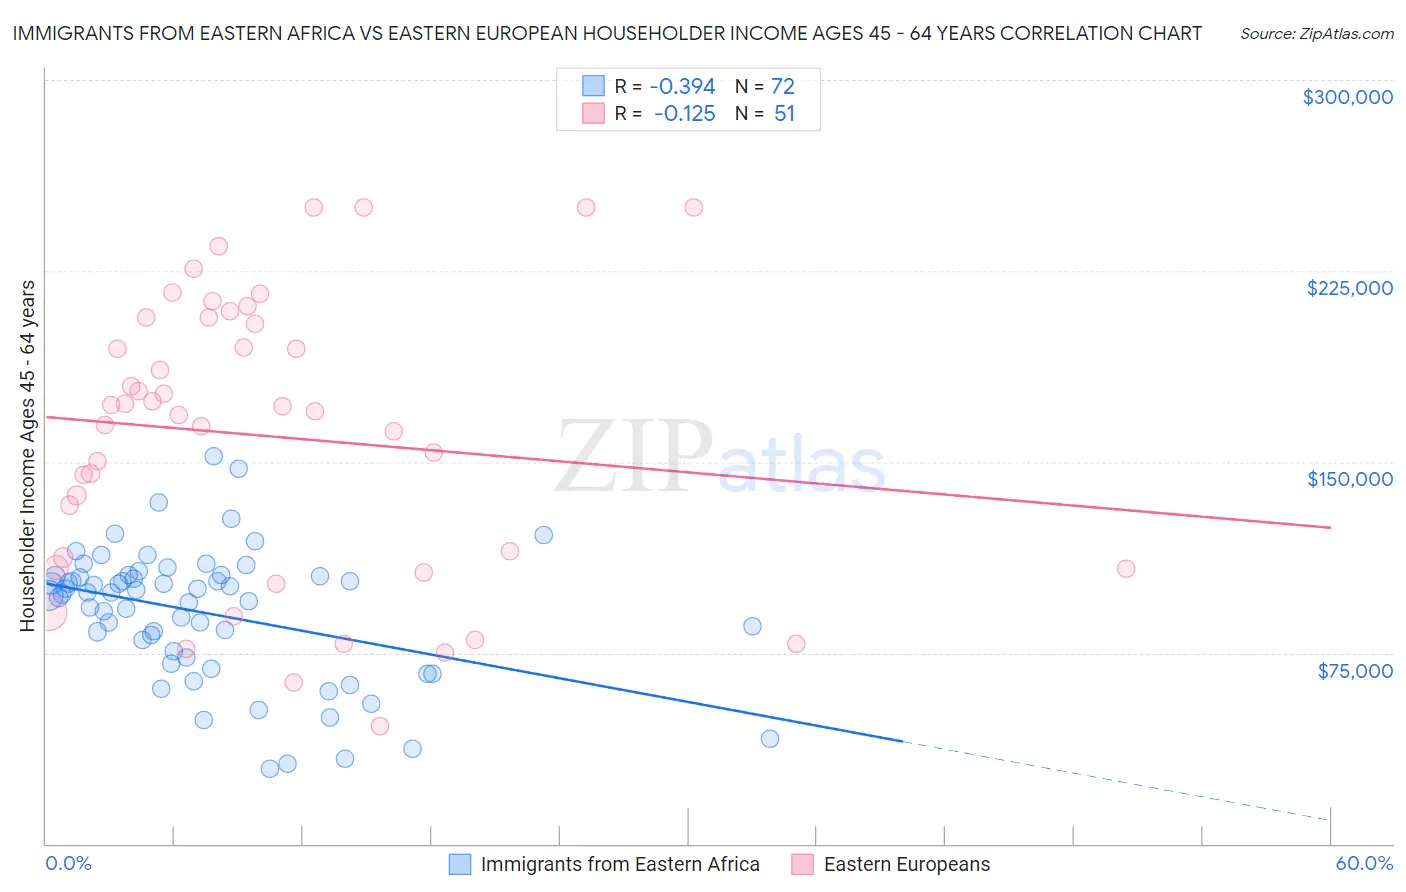 Immigrants from Eastern Africa vs Eastern European Householder Income Ages 45 - 64 years